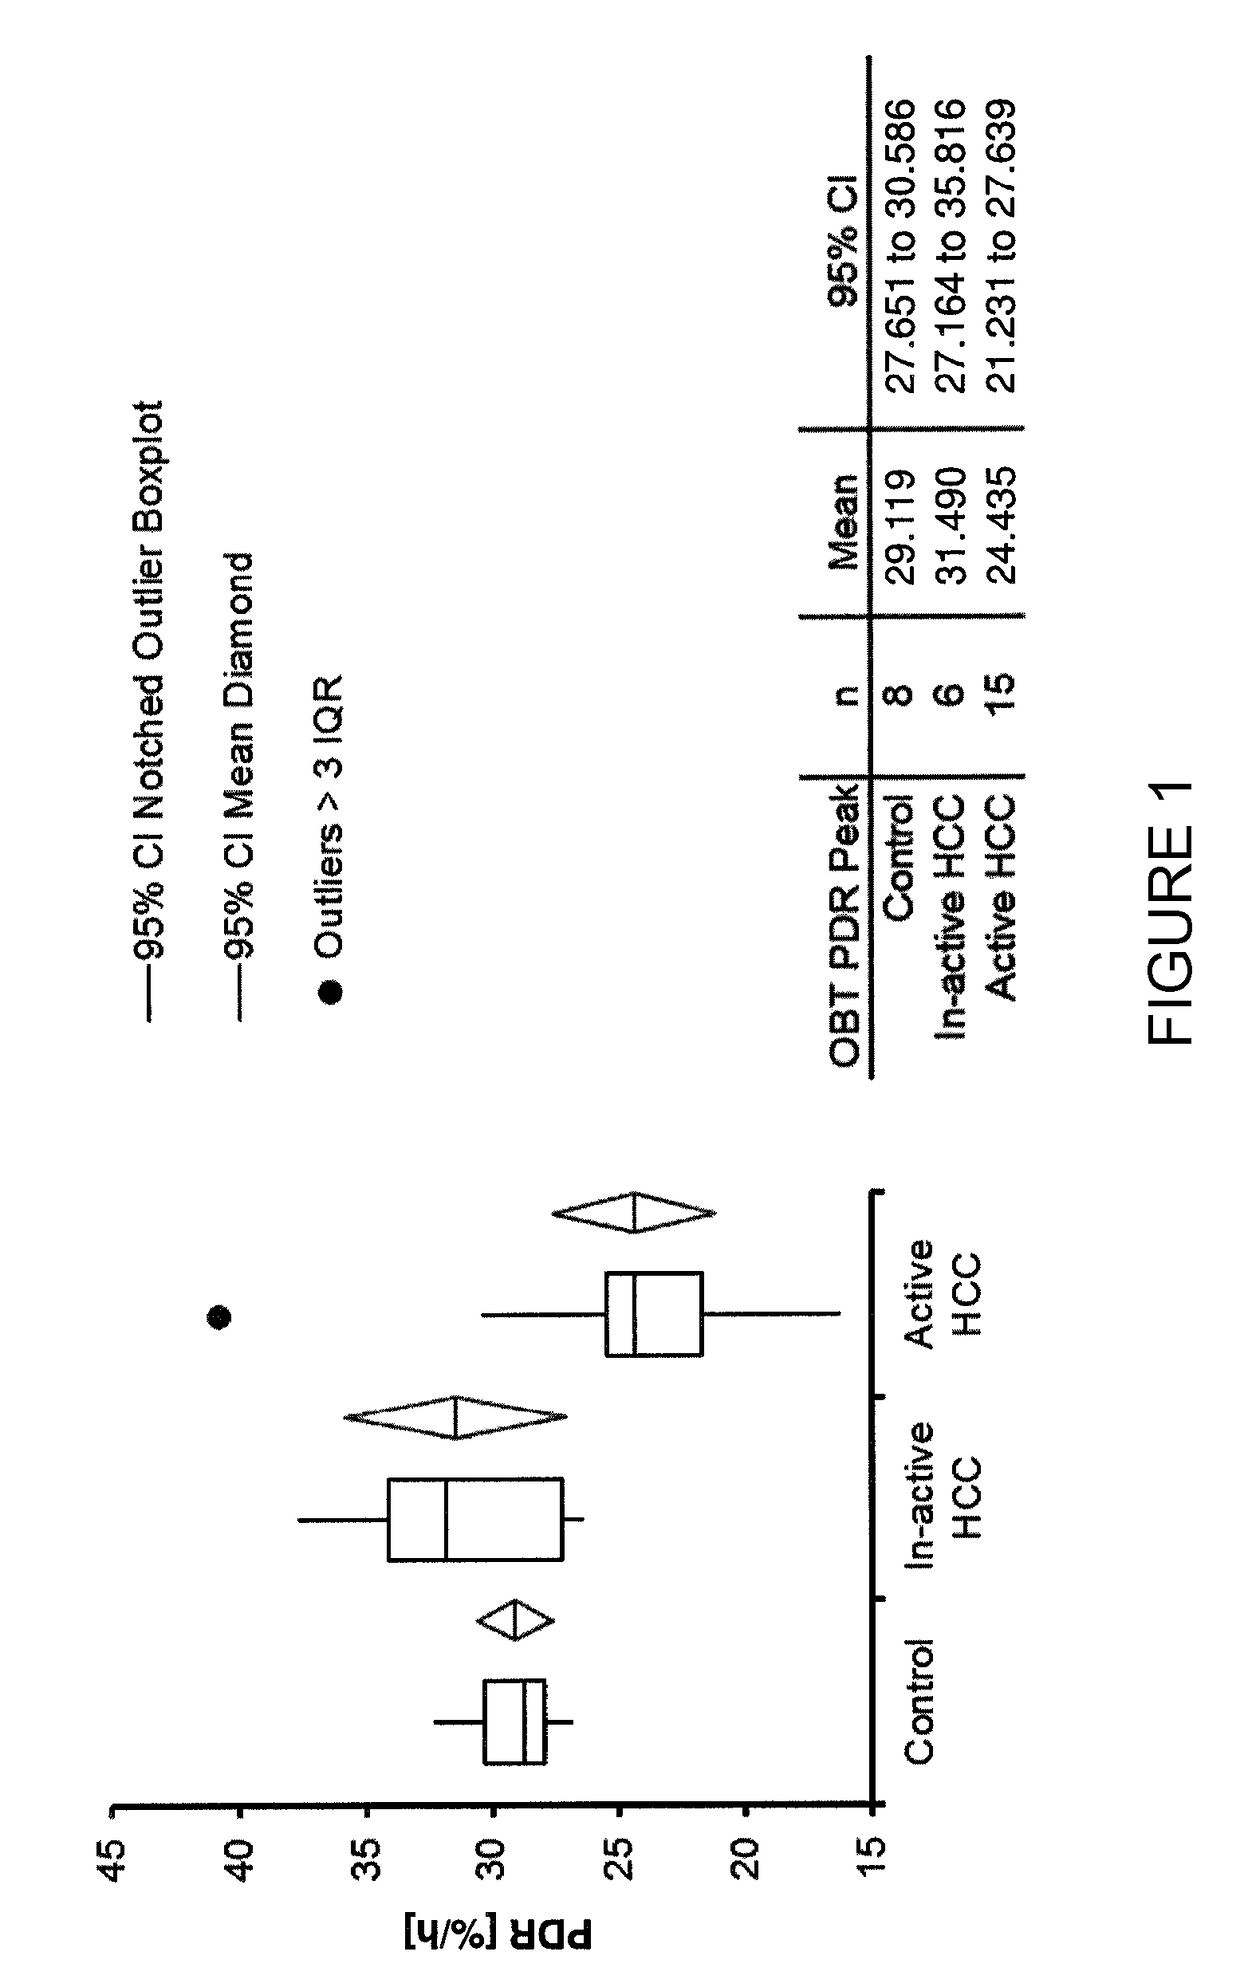 Method for detection of hepatocellar carcinoma (HCC) using an octanoate breath test